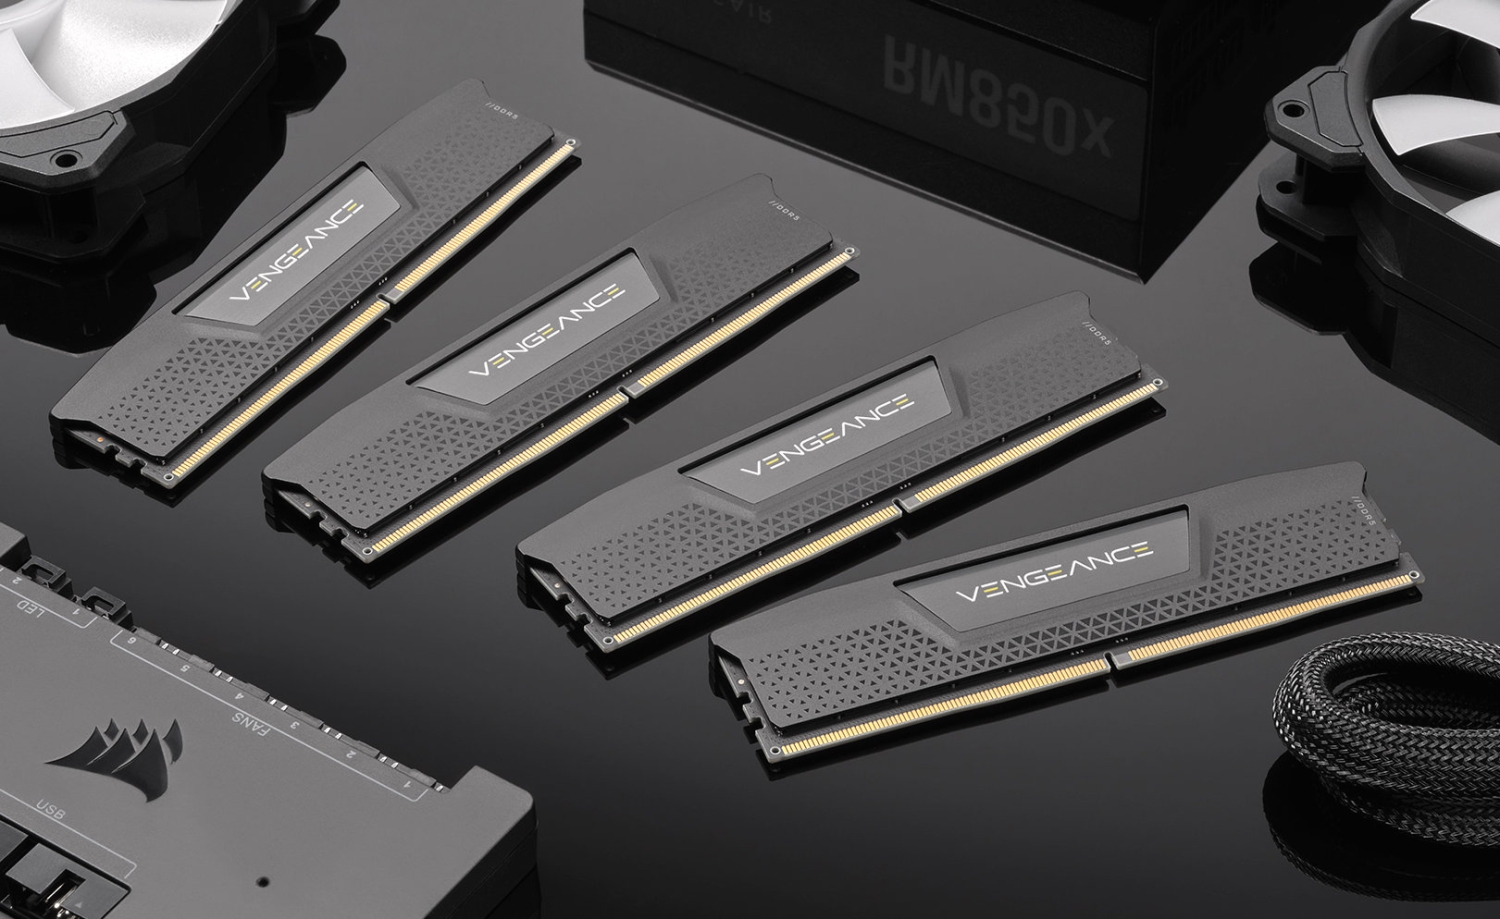 G.Skill Teases Its Next-Gen Trident Z DDR5 Series Gaming & Overclocking  Ready Memory